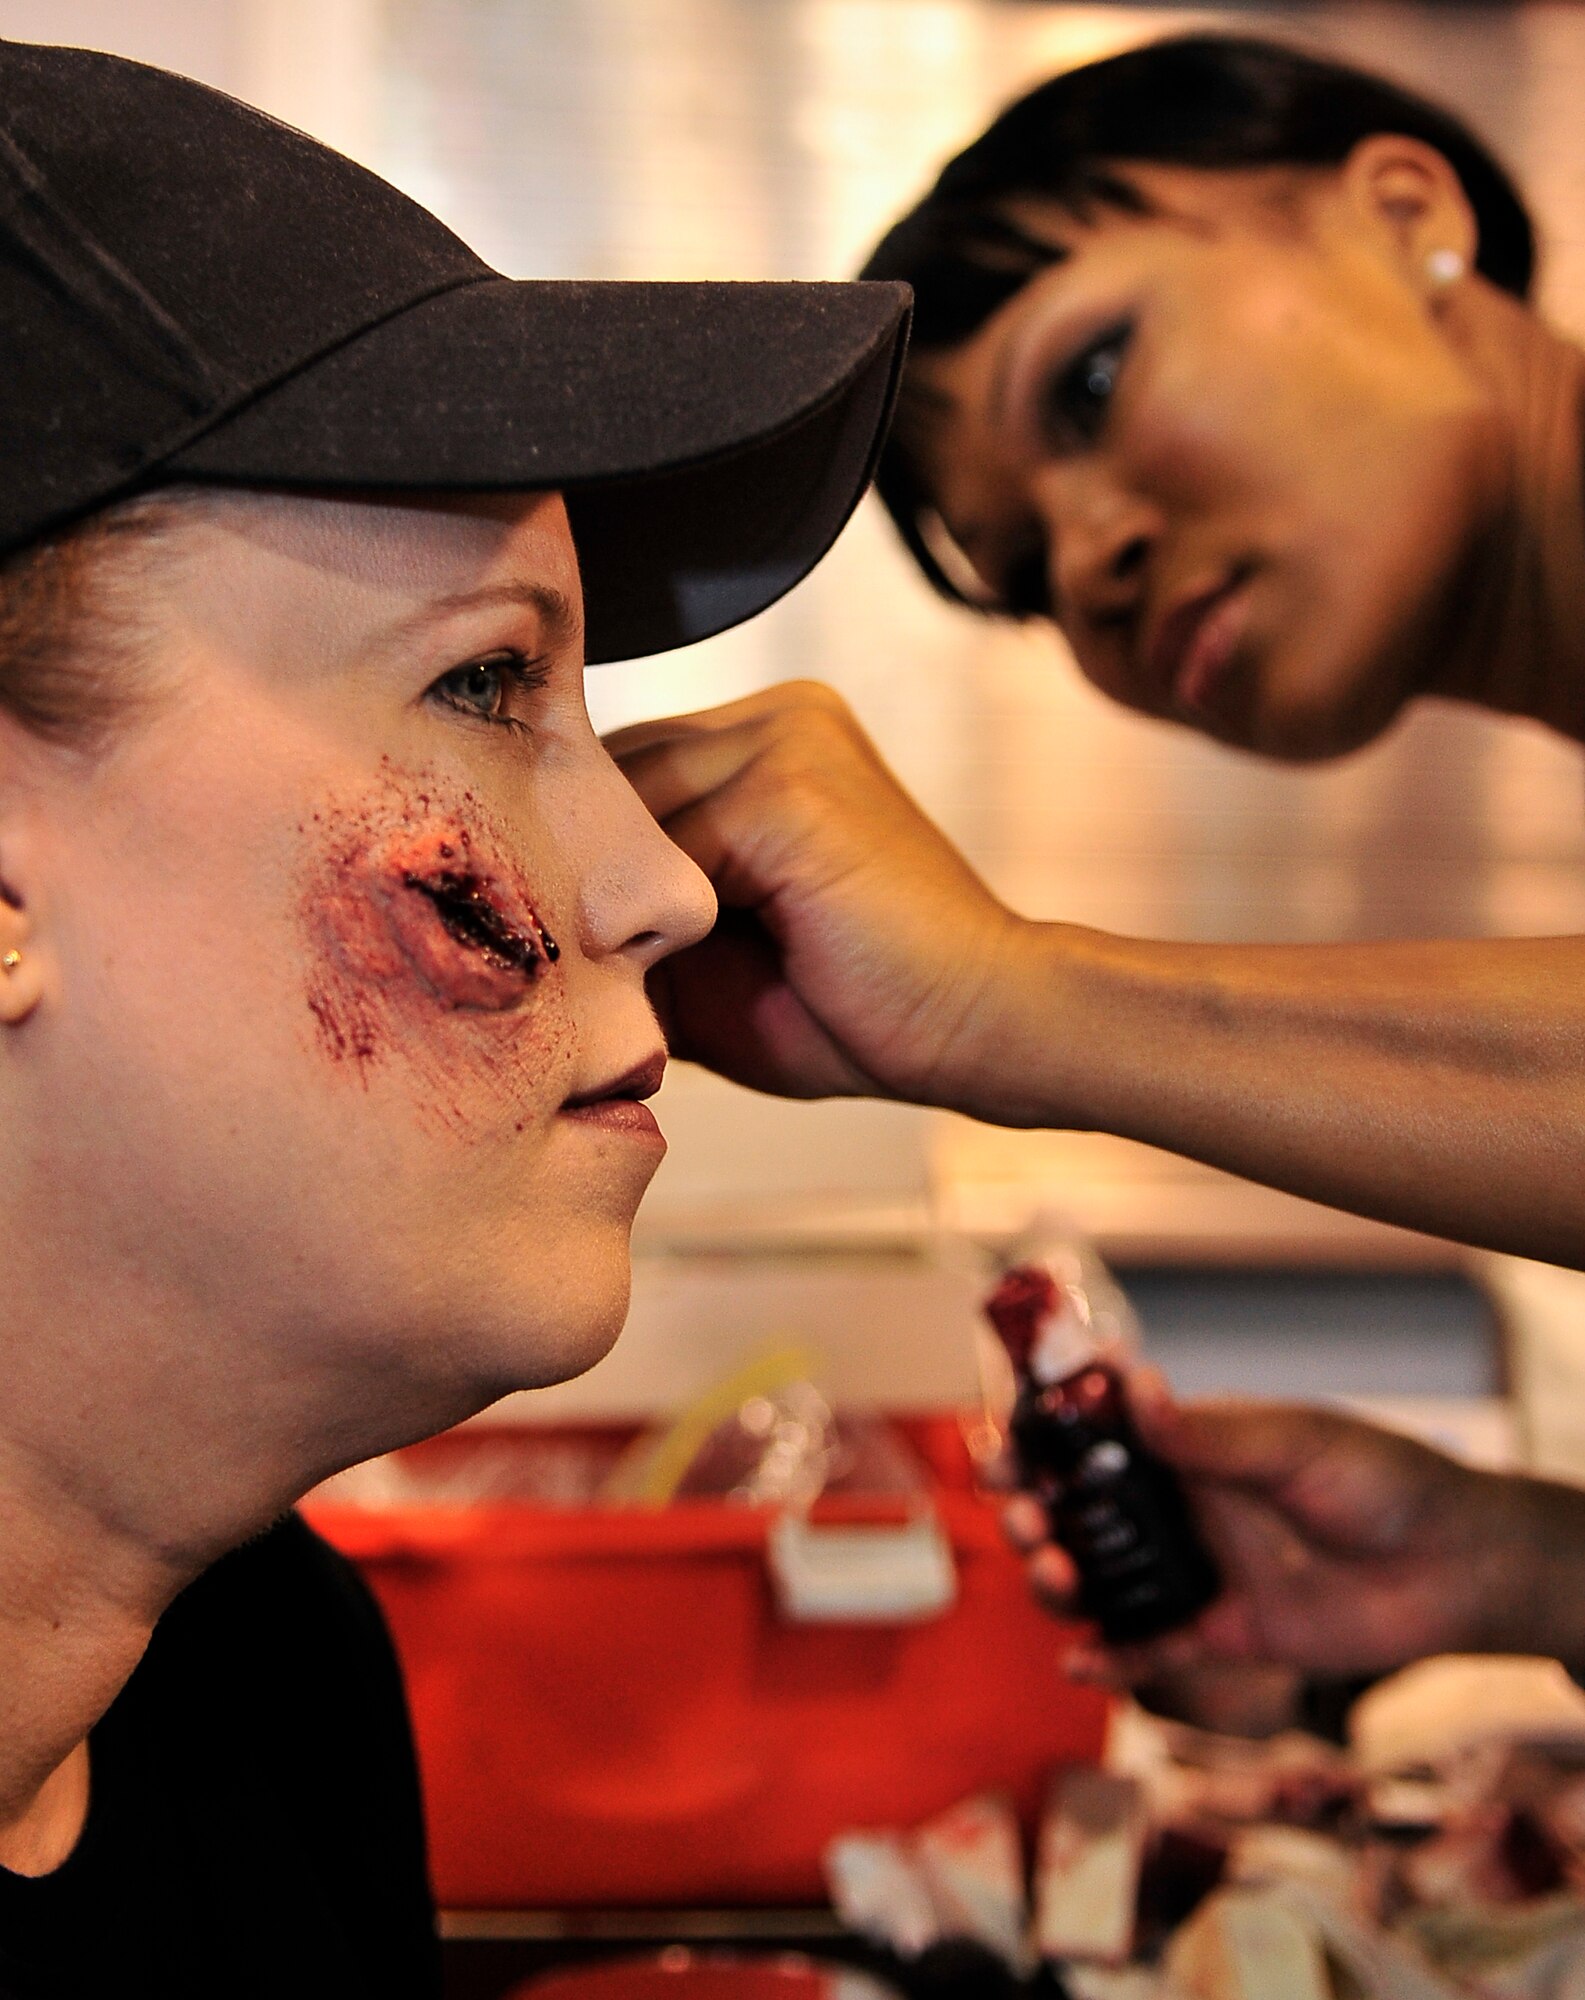 BUCKLEY AIR FORCE BASE, Colo. -- Technical Sgt. Teresa Forward, 460th Medical Operations Squadron, applies moulage to Staff Sgt. Melody Tucker, 460th Space Communications Squadron, before an All-Hazards Response Training exercise May 21. These mock injuries provide emergency responders more realistic training in assessing the care of crisis victims. (U.S. Air Force photo by Staff Sgt. Kathrine McDowell)